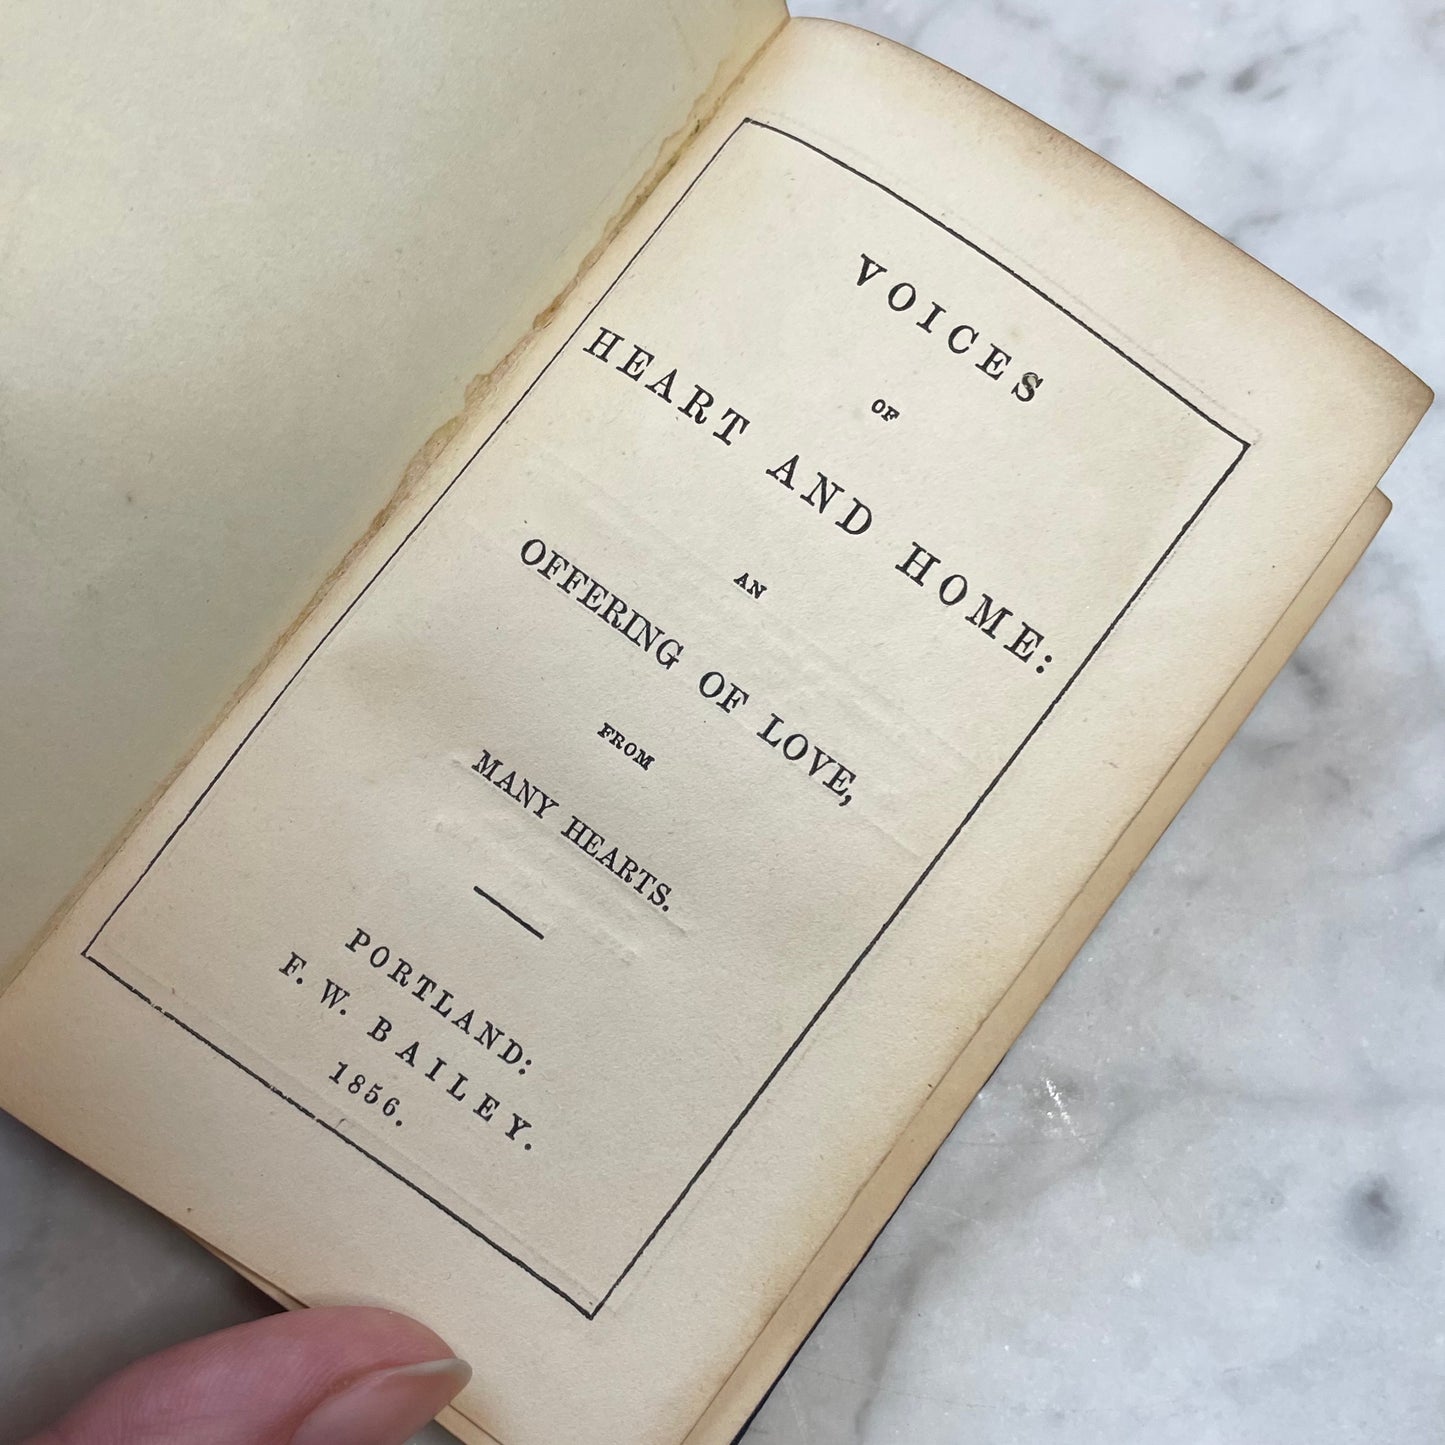 Voices from Heart & Home, 1856 | An Offering of Love from Many Voices